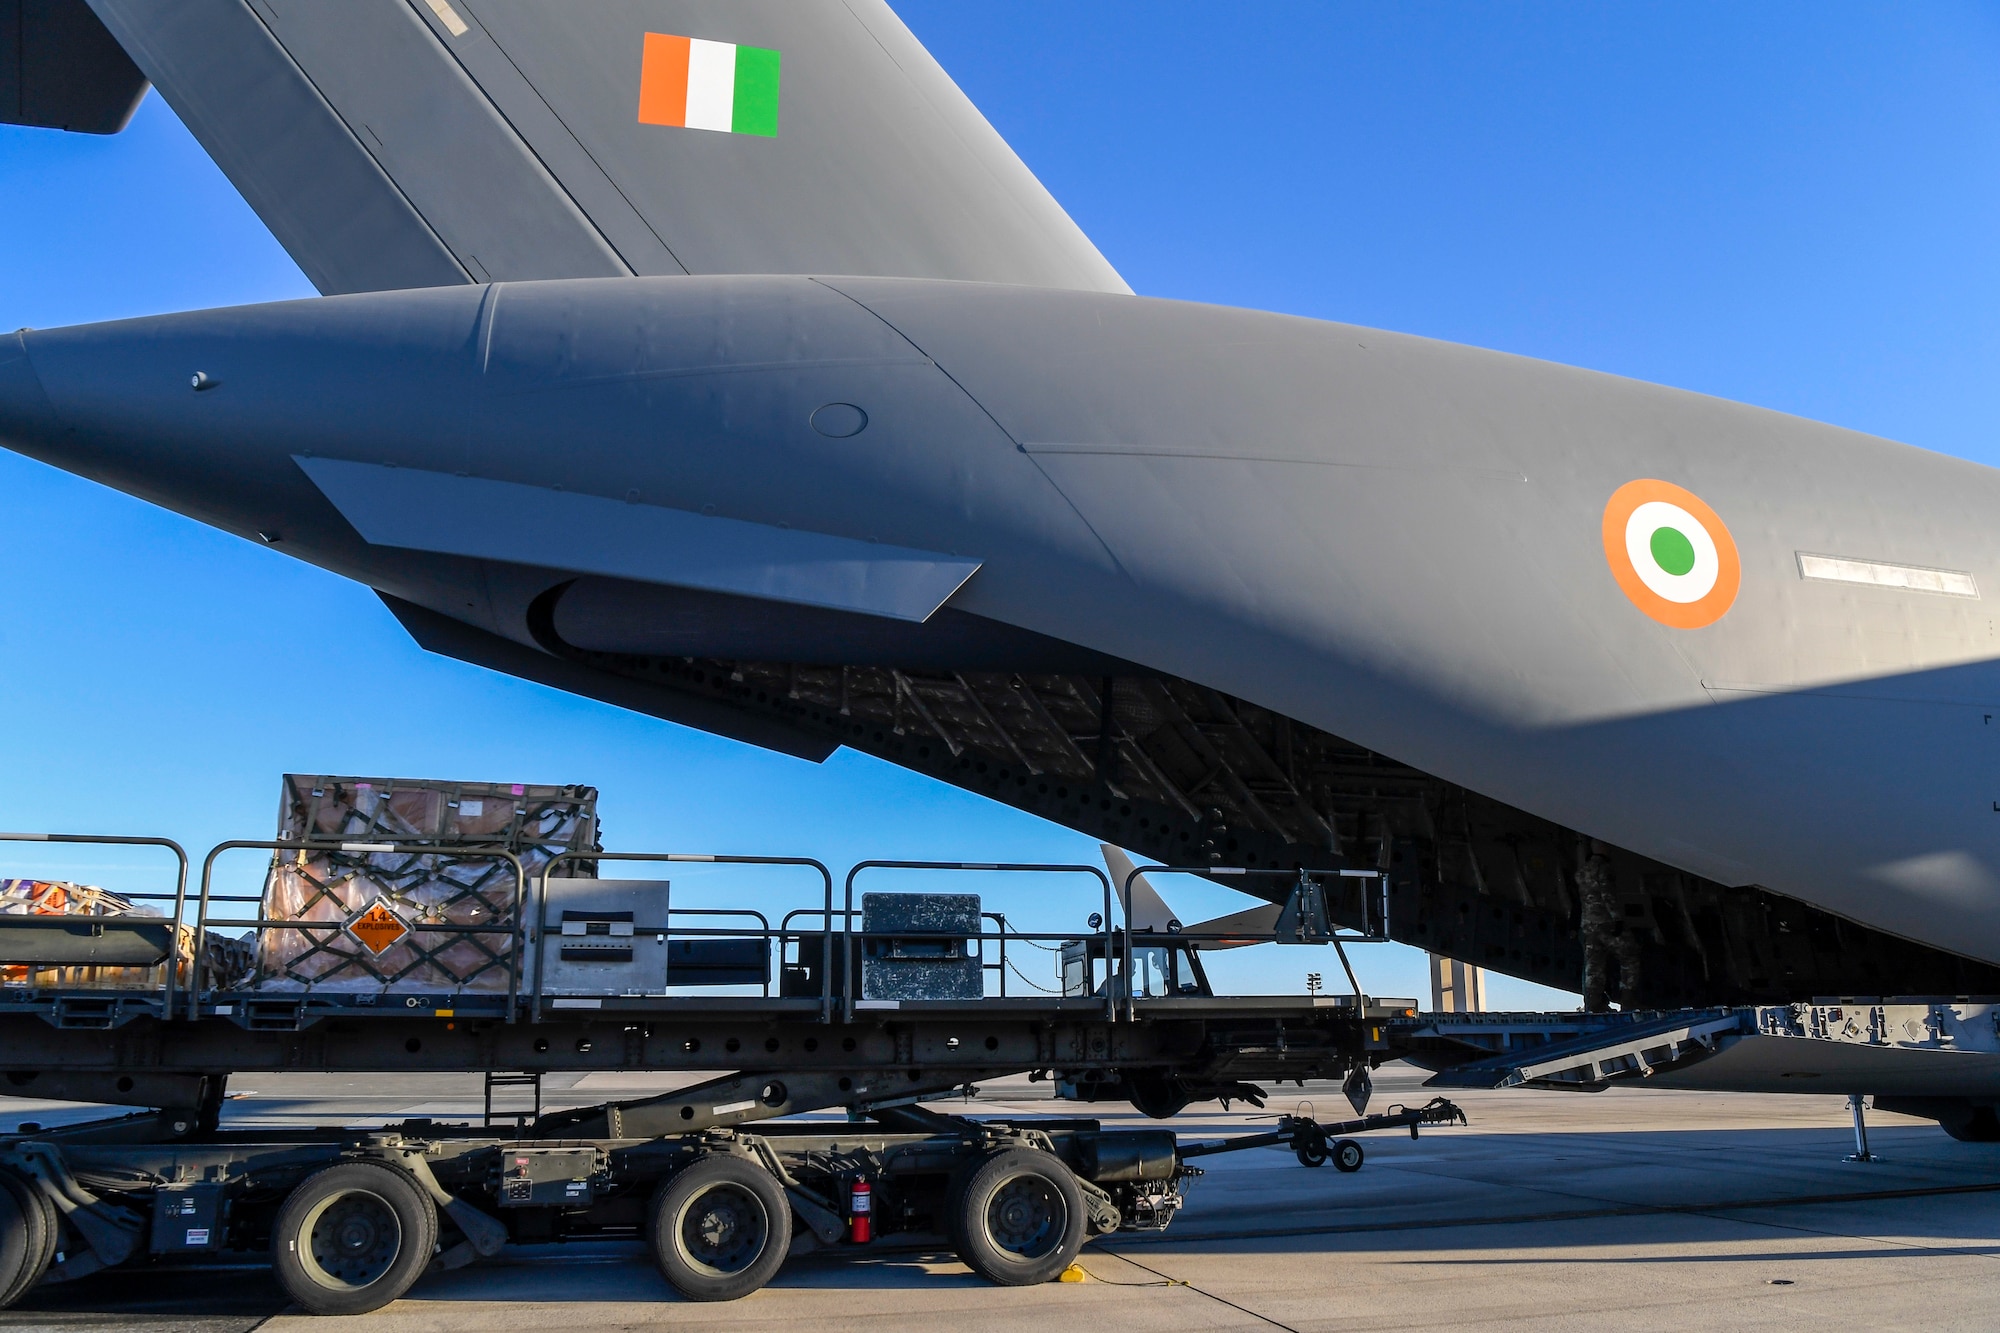 Airmen from the 436th Aerial Port Squadron prepare to load cargo onto an Indian air force C-17 Globemaster III Nov. 20, 2020, at Dover Air Force Base, Delaware. The U.S. strengthens its international partnerships through foreign military sales. Dover AFB actively supports $3.5 billion worth of FMS due to its strategic location and 436th Aerial Port Squadron, the largest aerial port in the Department of Defense. As the world’s oldest and largest democracies, the United States and India share a commitment to freedom, human rights and rule of law. (U.S. Air Force photo by Senior Airman Christopher Quail)